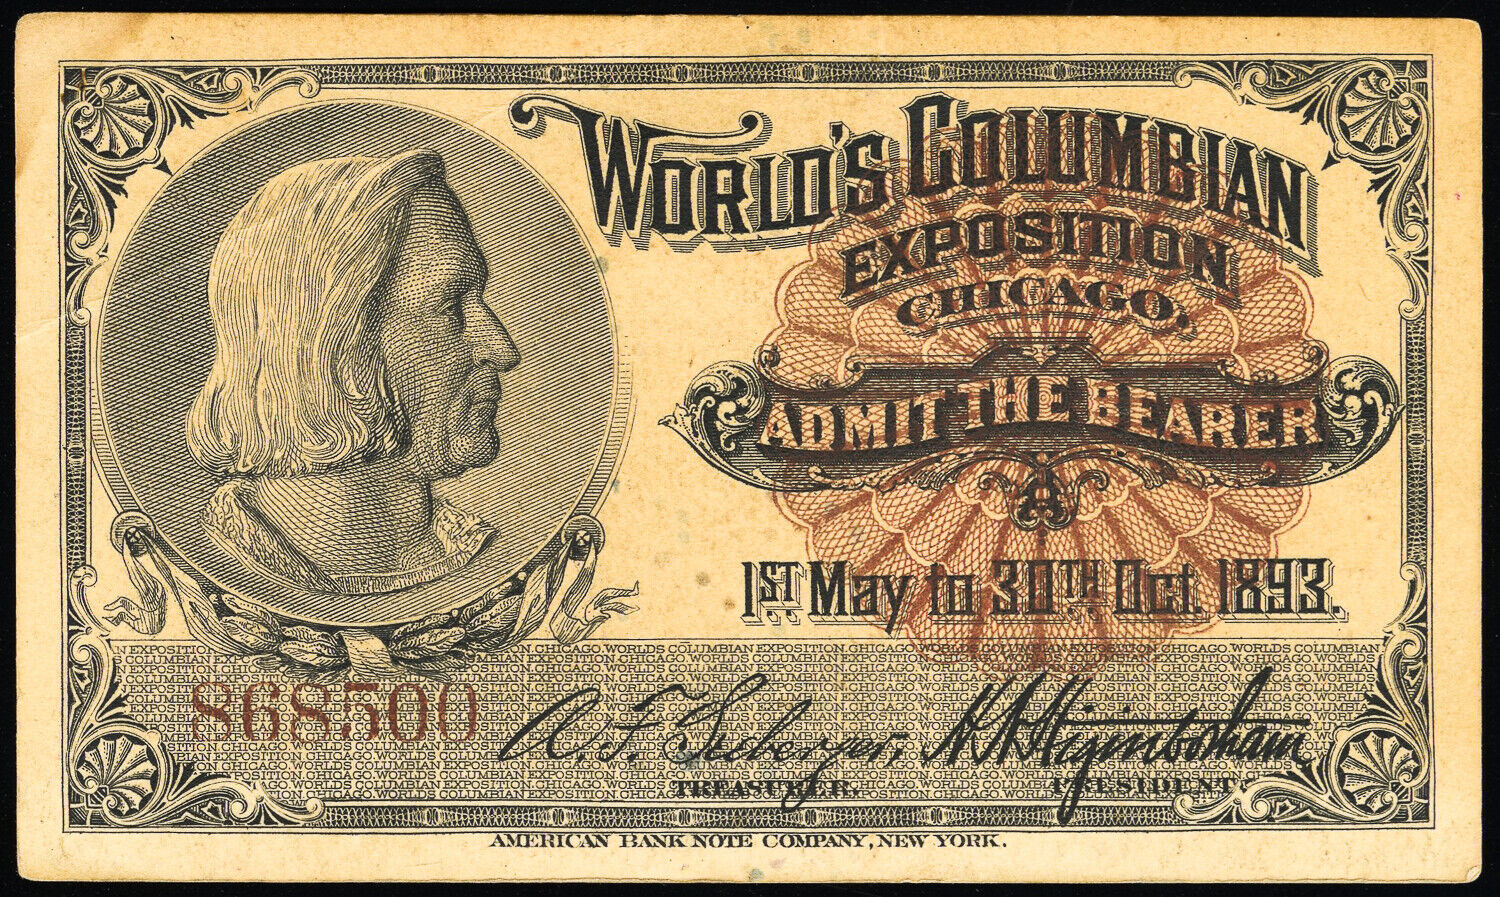 US Worlds Fair 1893 Ticket To Expo Columbian Expo